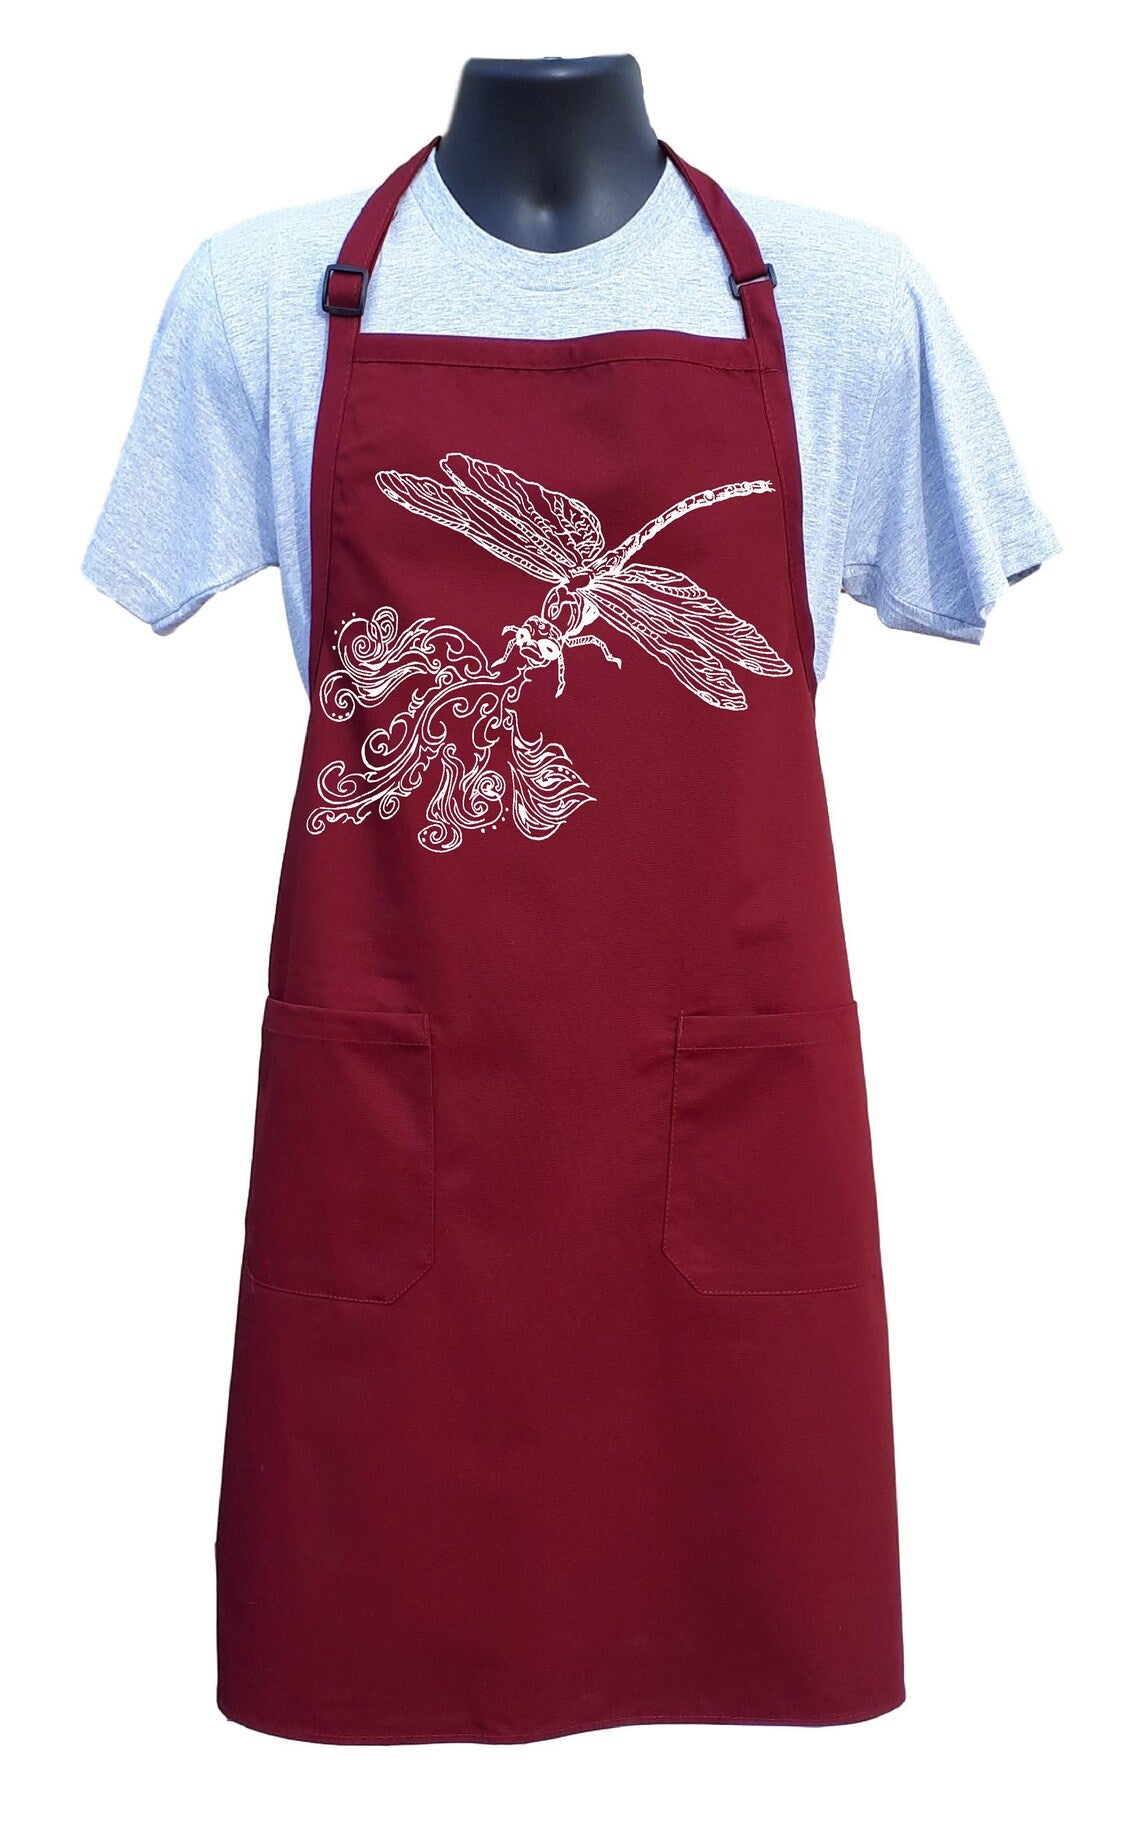 Fire Breathing Dragonfly Chef's Apron with Pockets